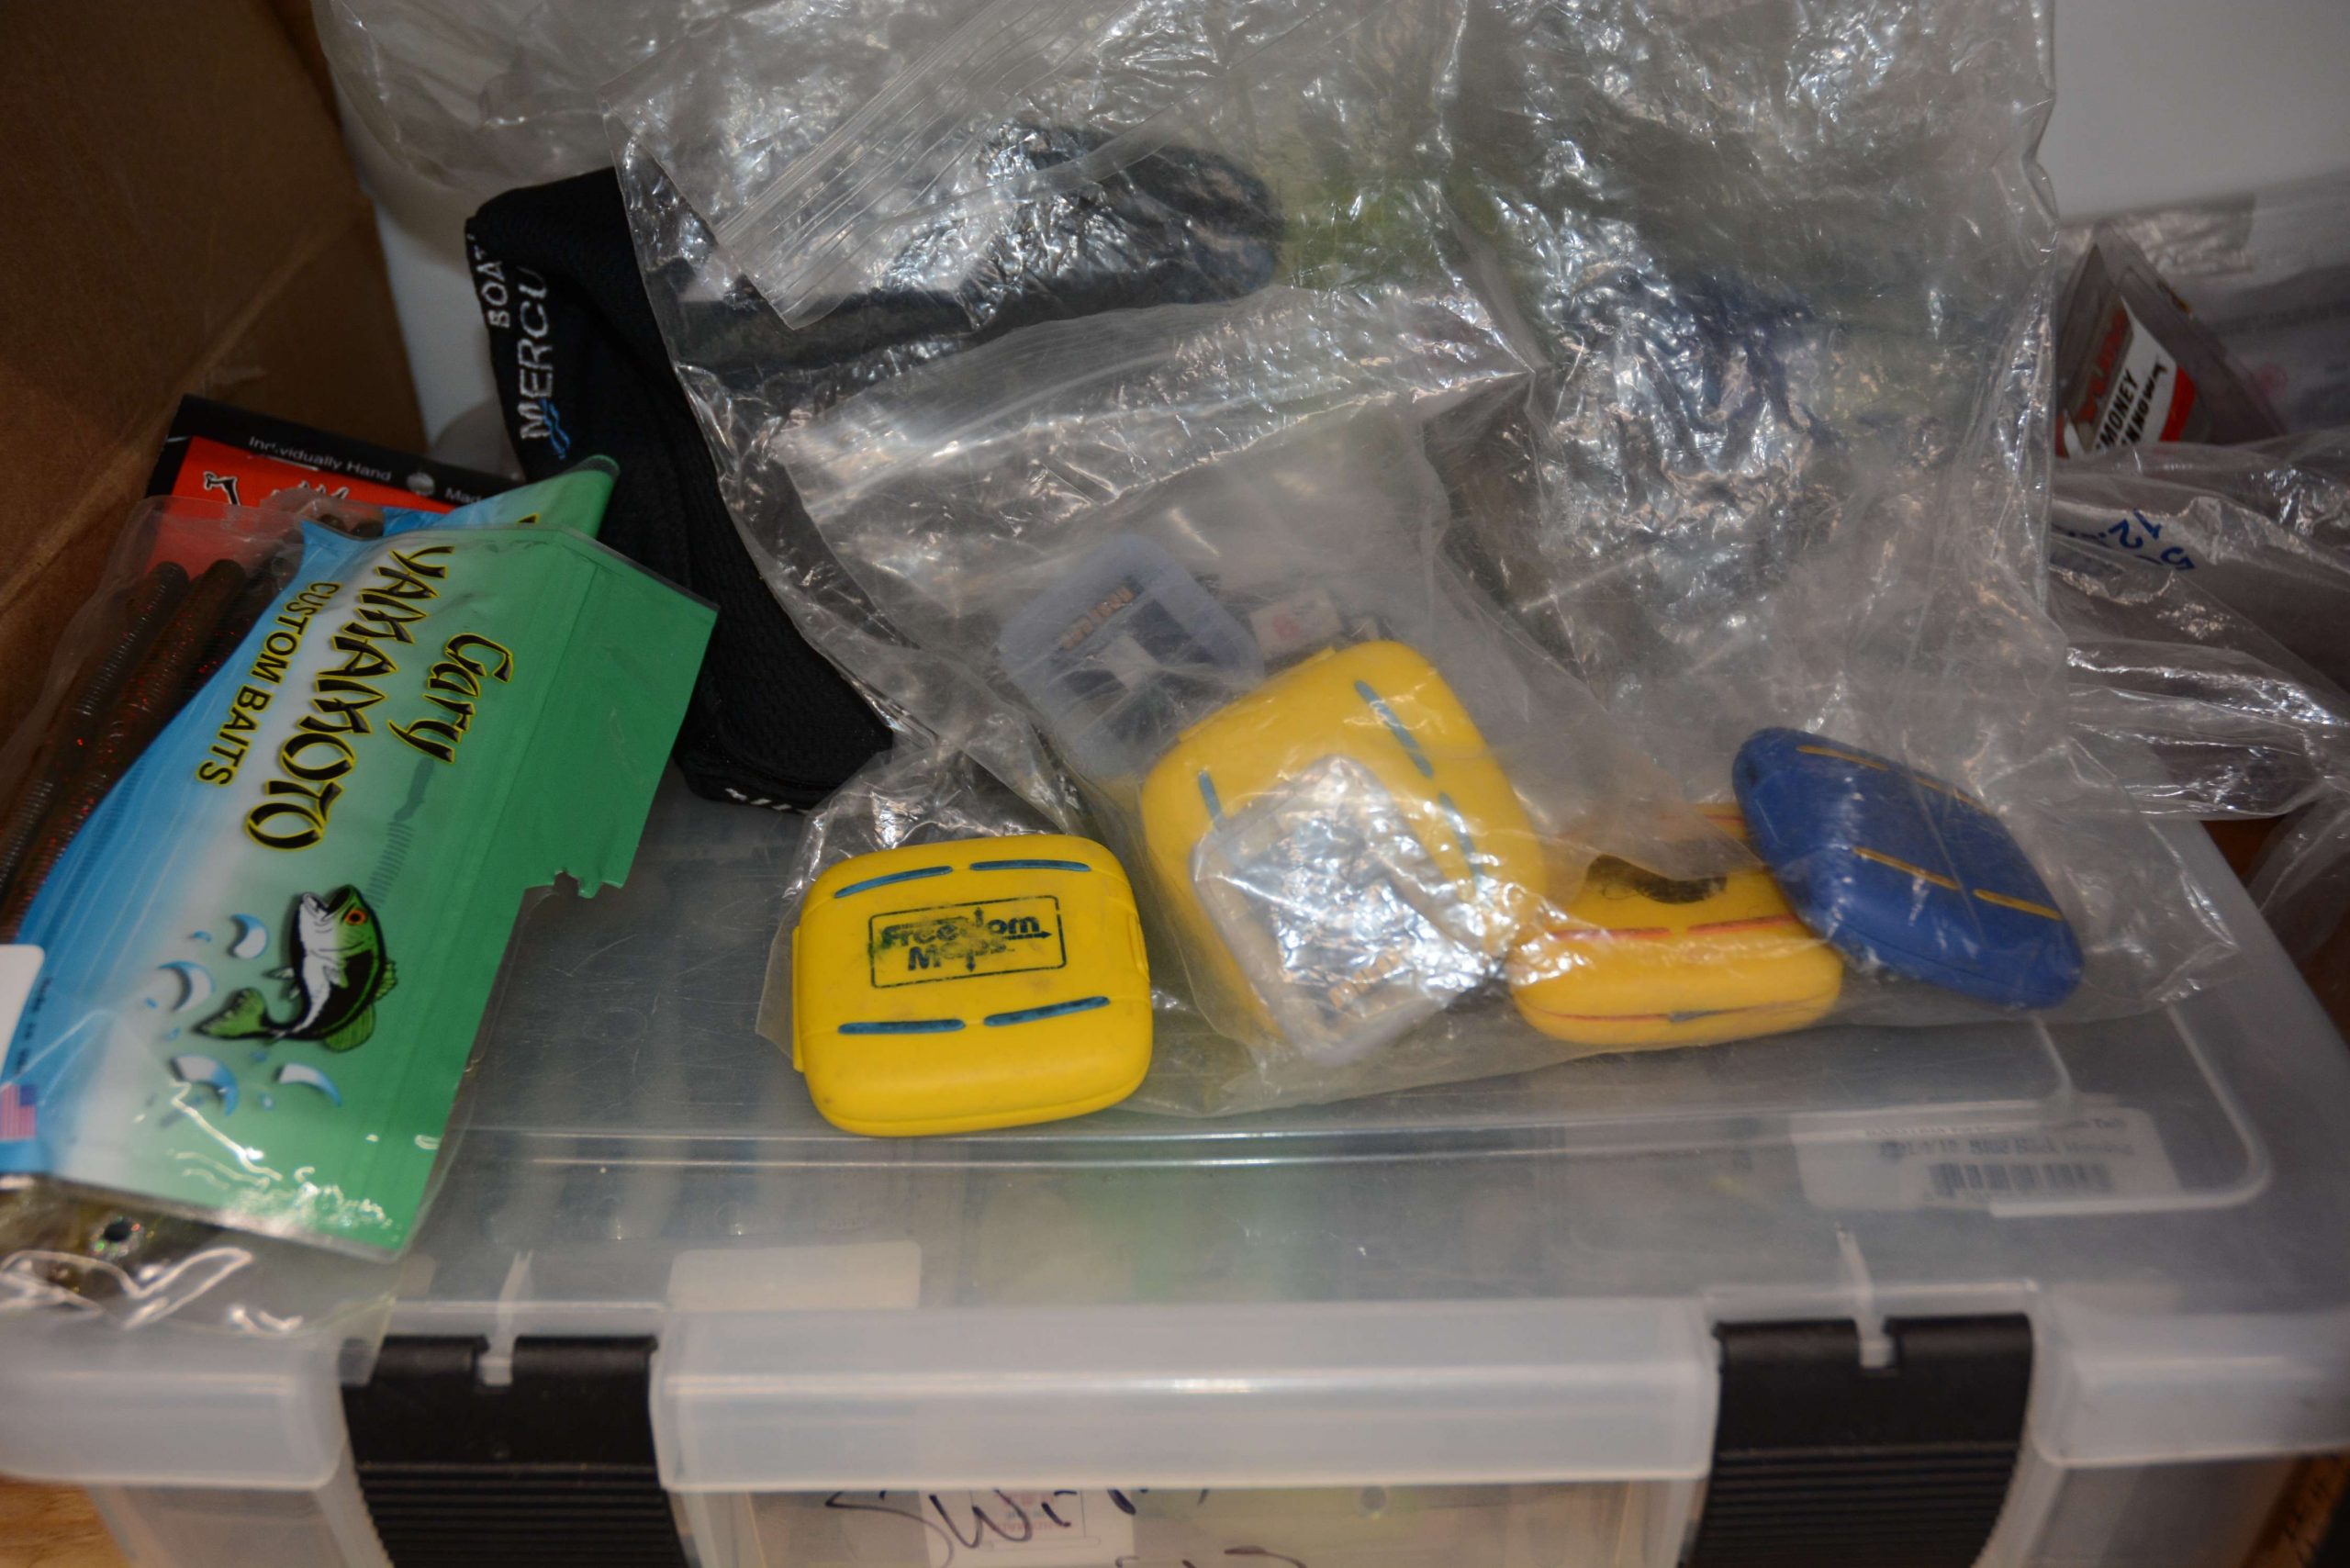 Thereâs a lot of secret intelligence info stored in these zip-close bags. Inside those yellow boxes are map cards for the Lowrance units at bow and dashboard. 